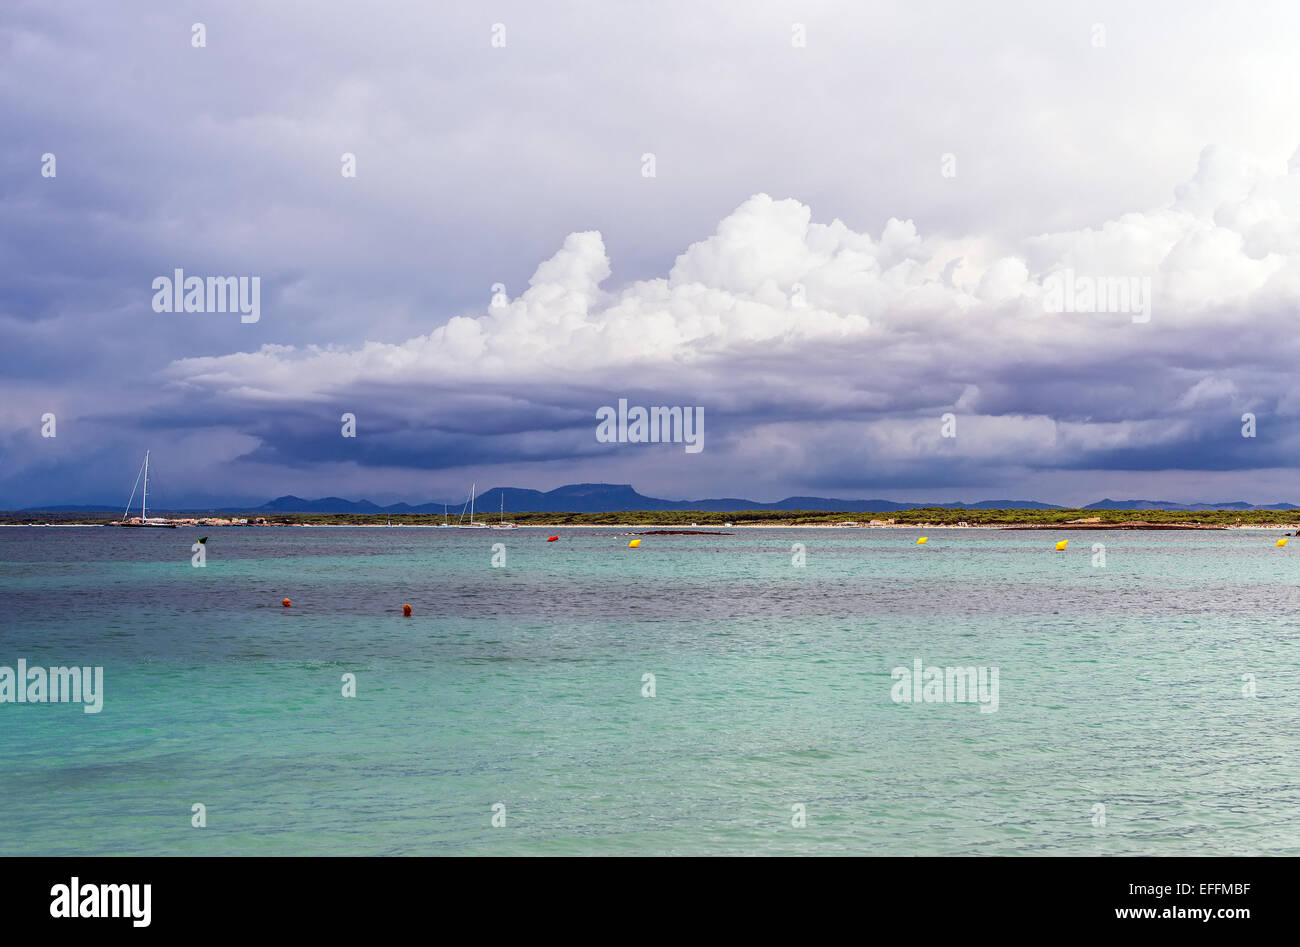 Tropical storm coming in the sea. Stock Photo